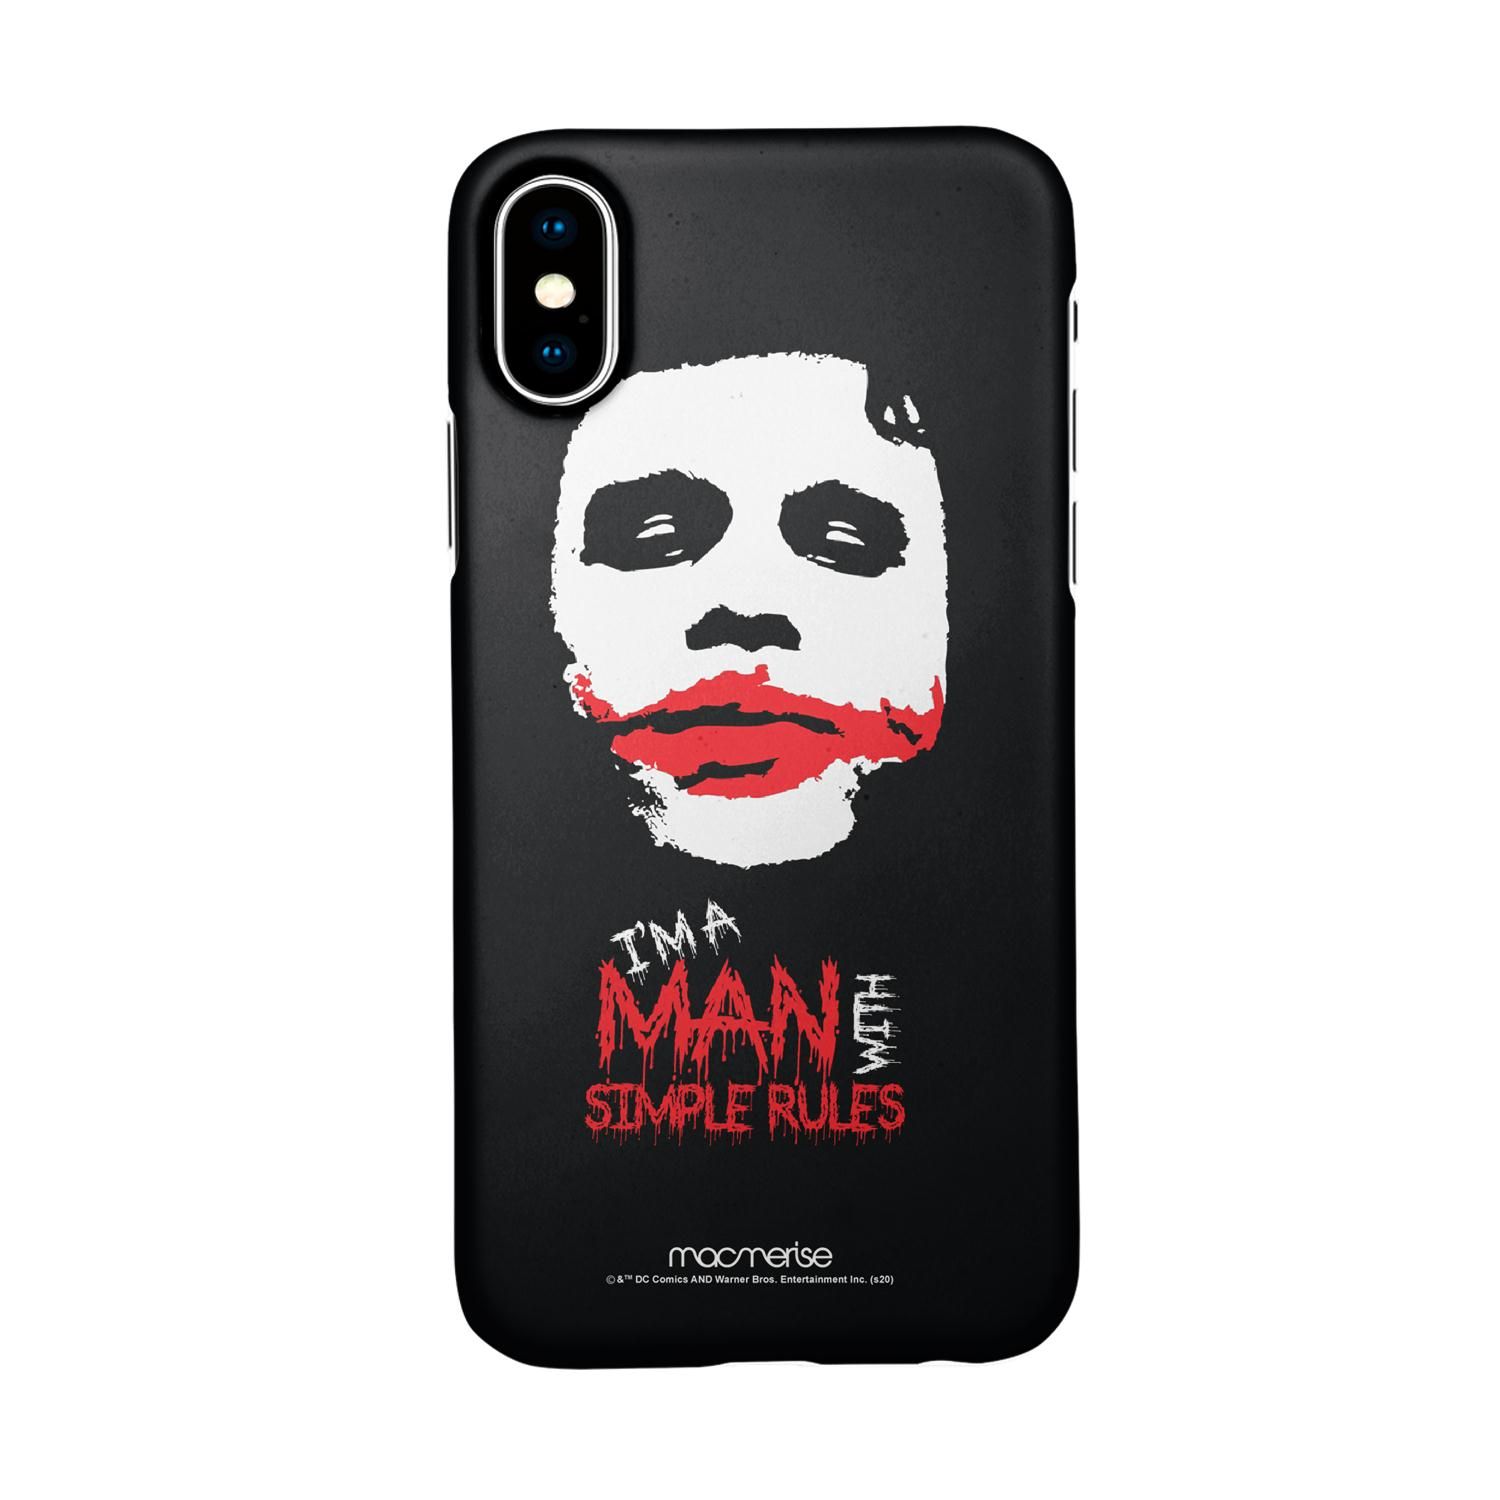 Man With Simple Rules - Sleek Phone Case for iPhone X